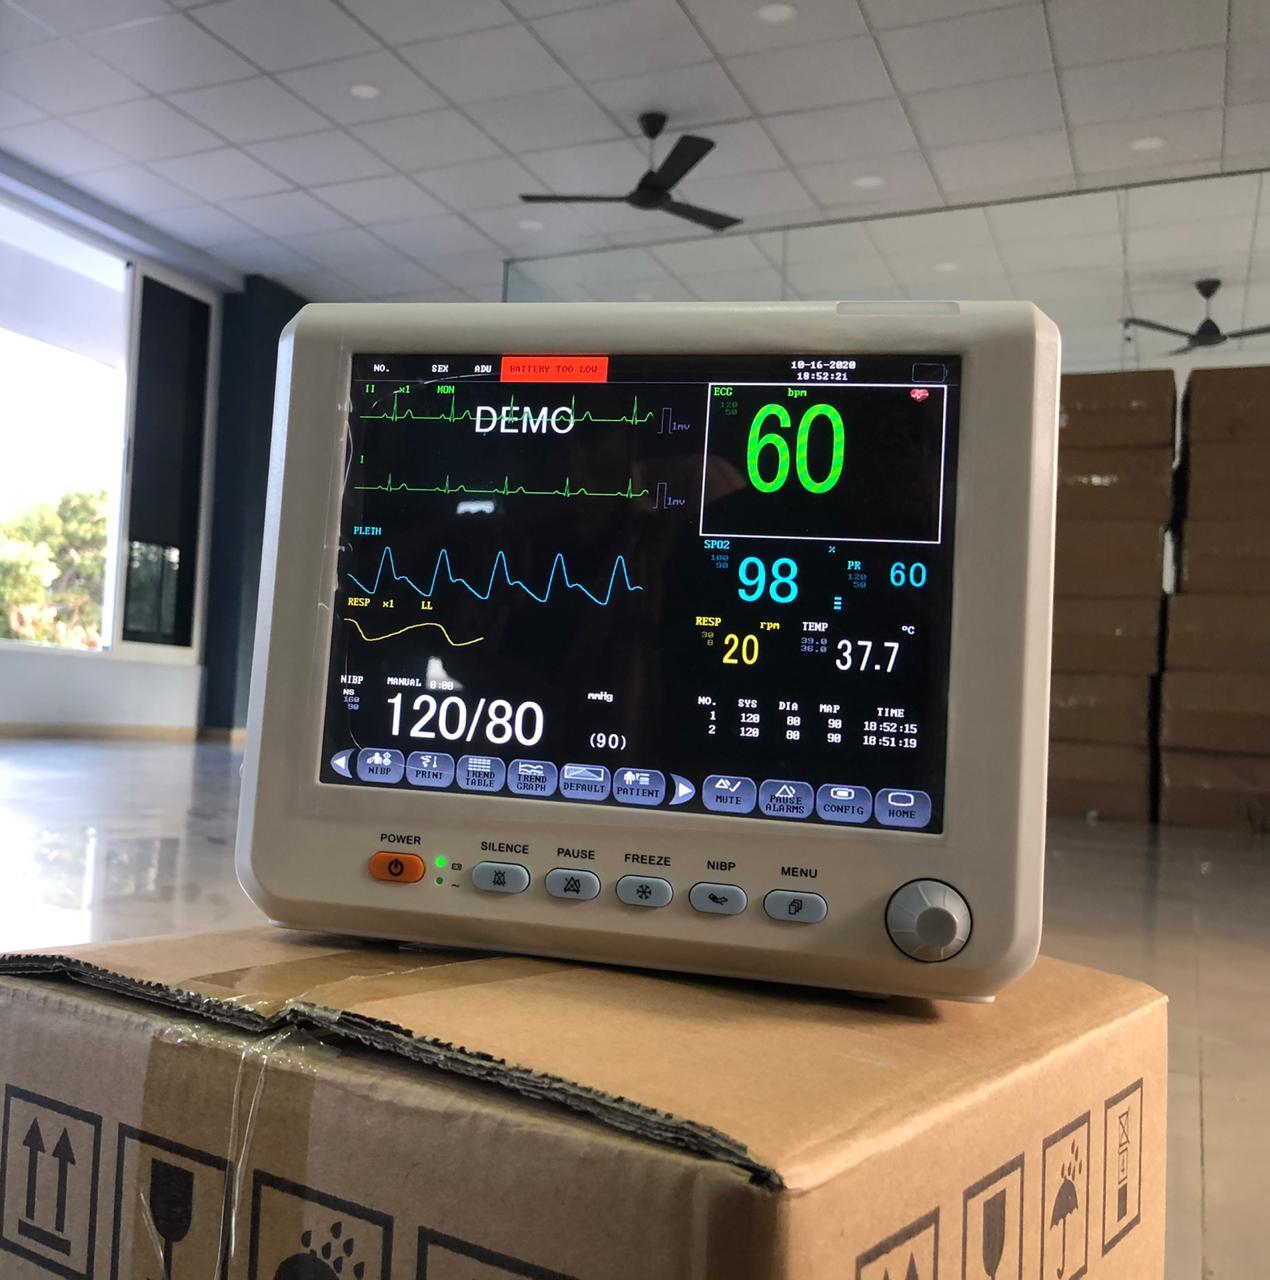 PATIENT MONITOR 8 INCH